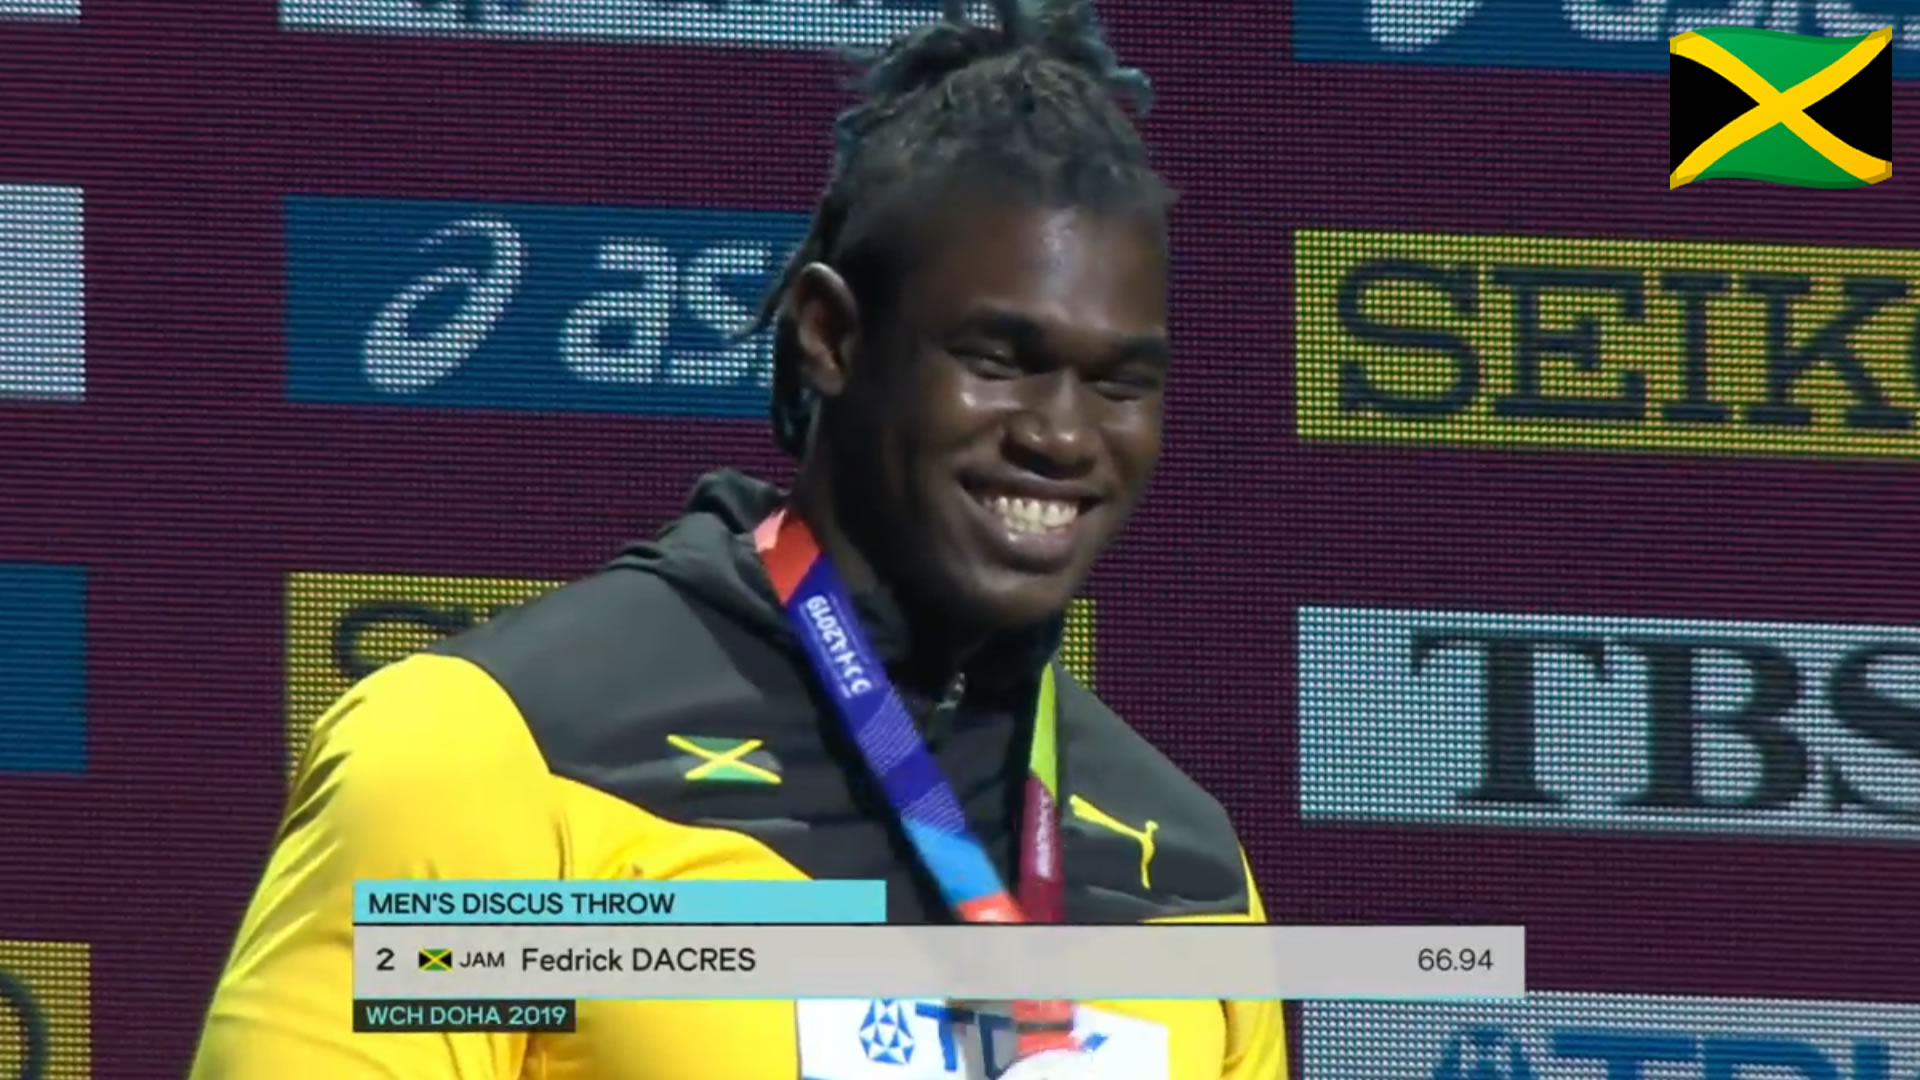 Watch: Fedrick Dacres wins silver, earns Jamaica's first Discus Throw medal in World Championships history